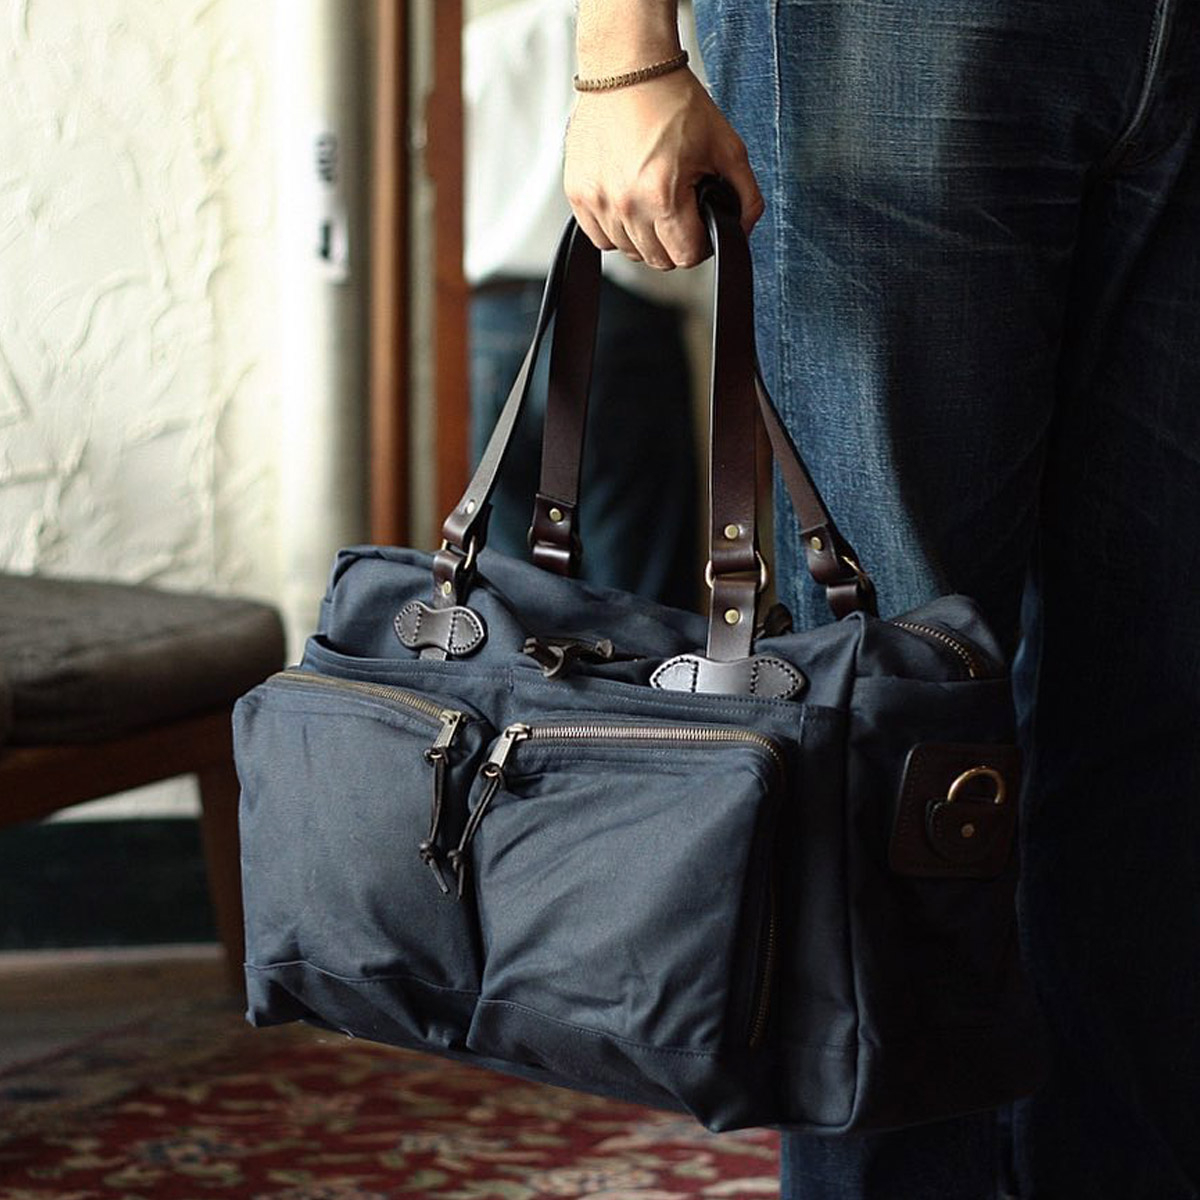 Filson 48-Hour Tin Cloth Duffle Bag Navy, perfect bag for a long weekend away or a small business-trip